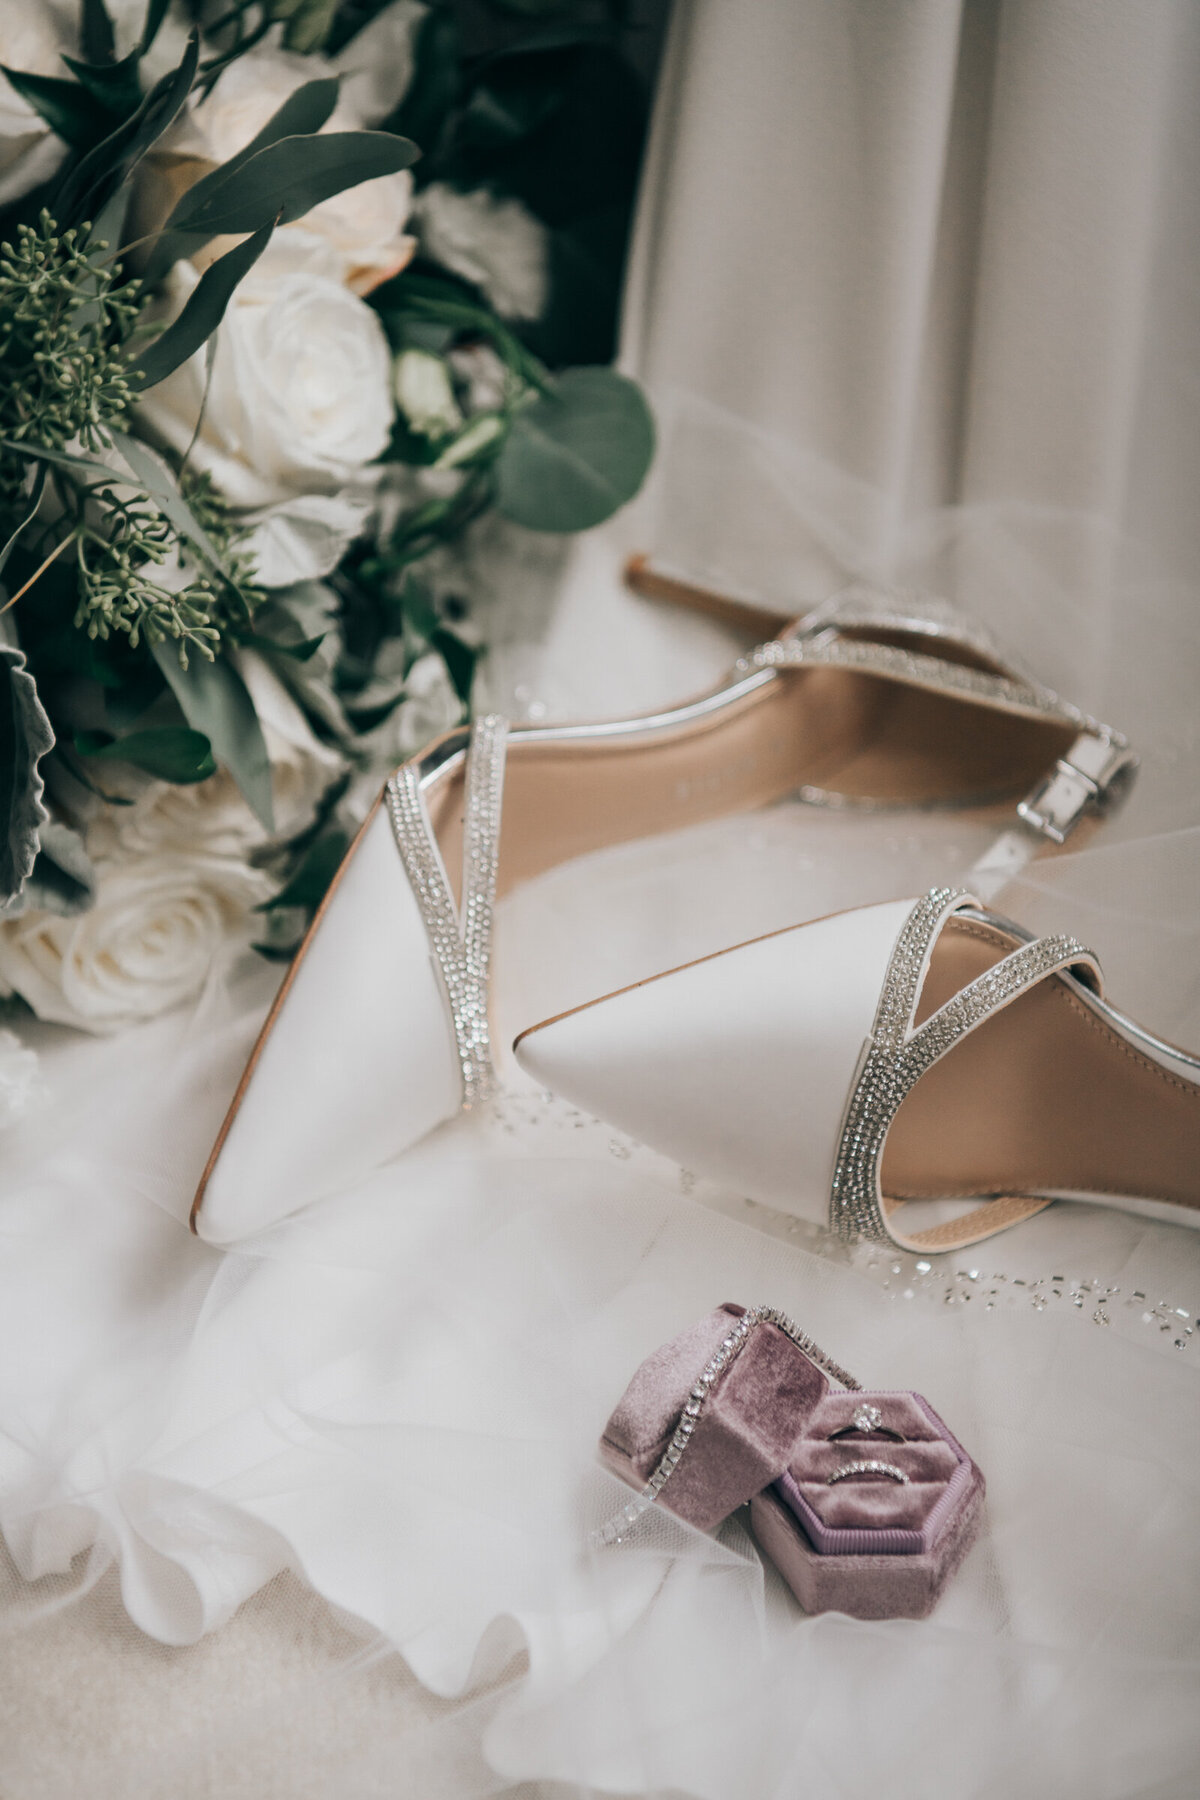 Elegant bridal details on the morning of the wedding days. Shoes, wedding rings, wedding invitation and bridal bouquet.